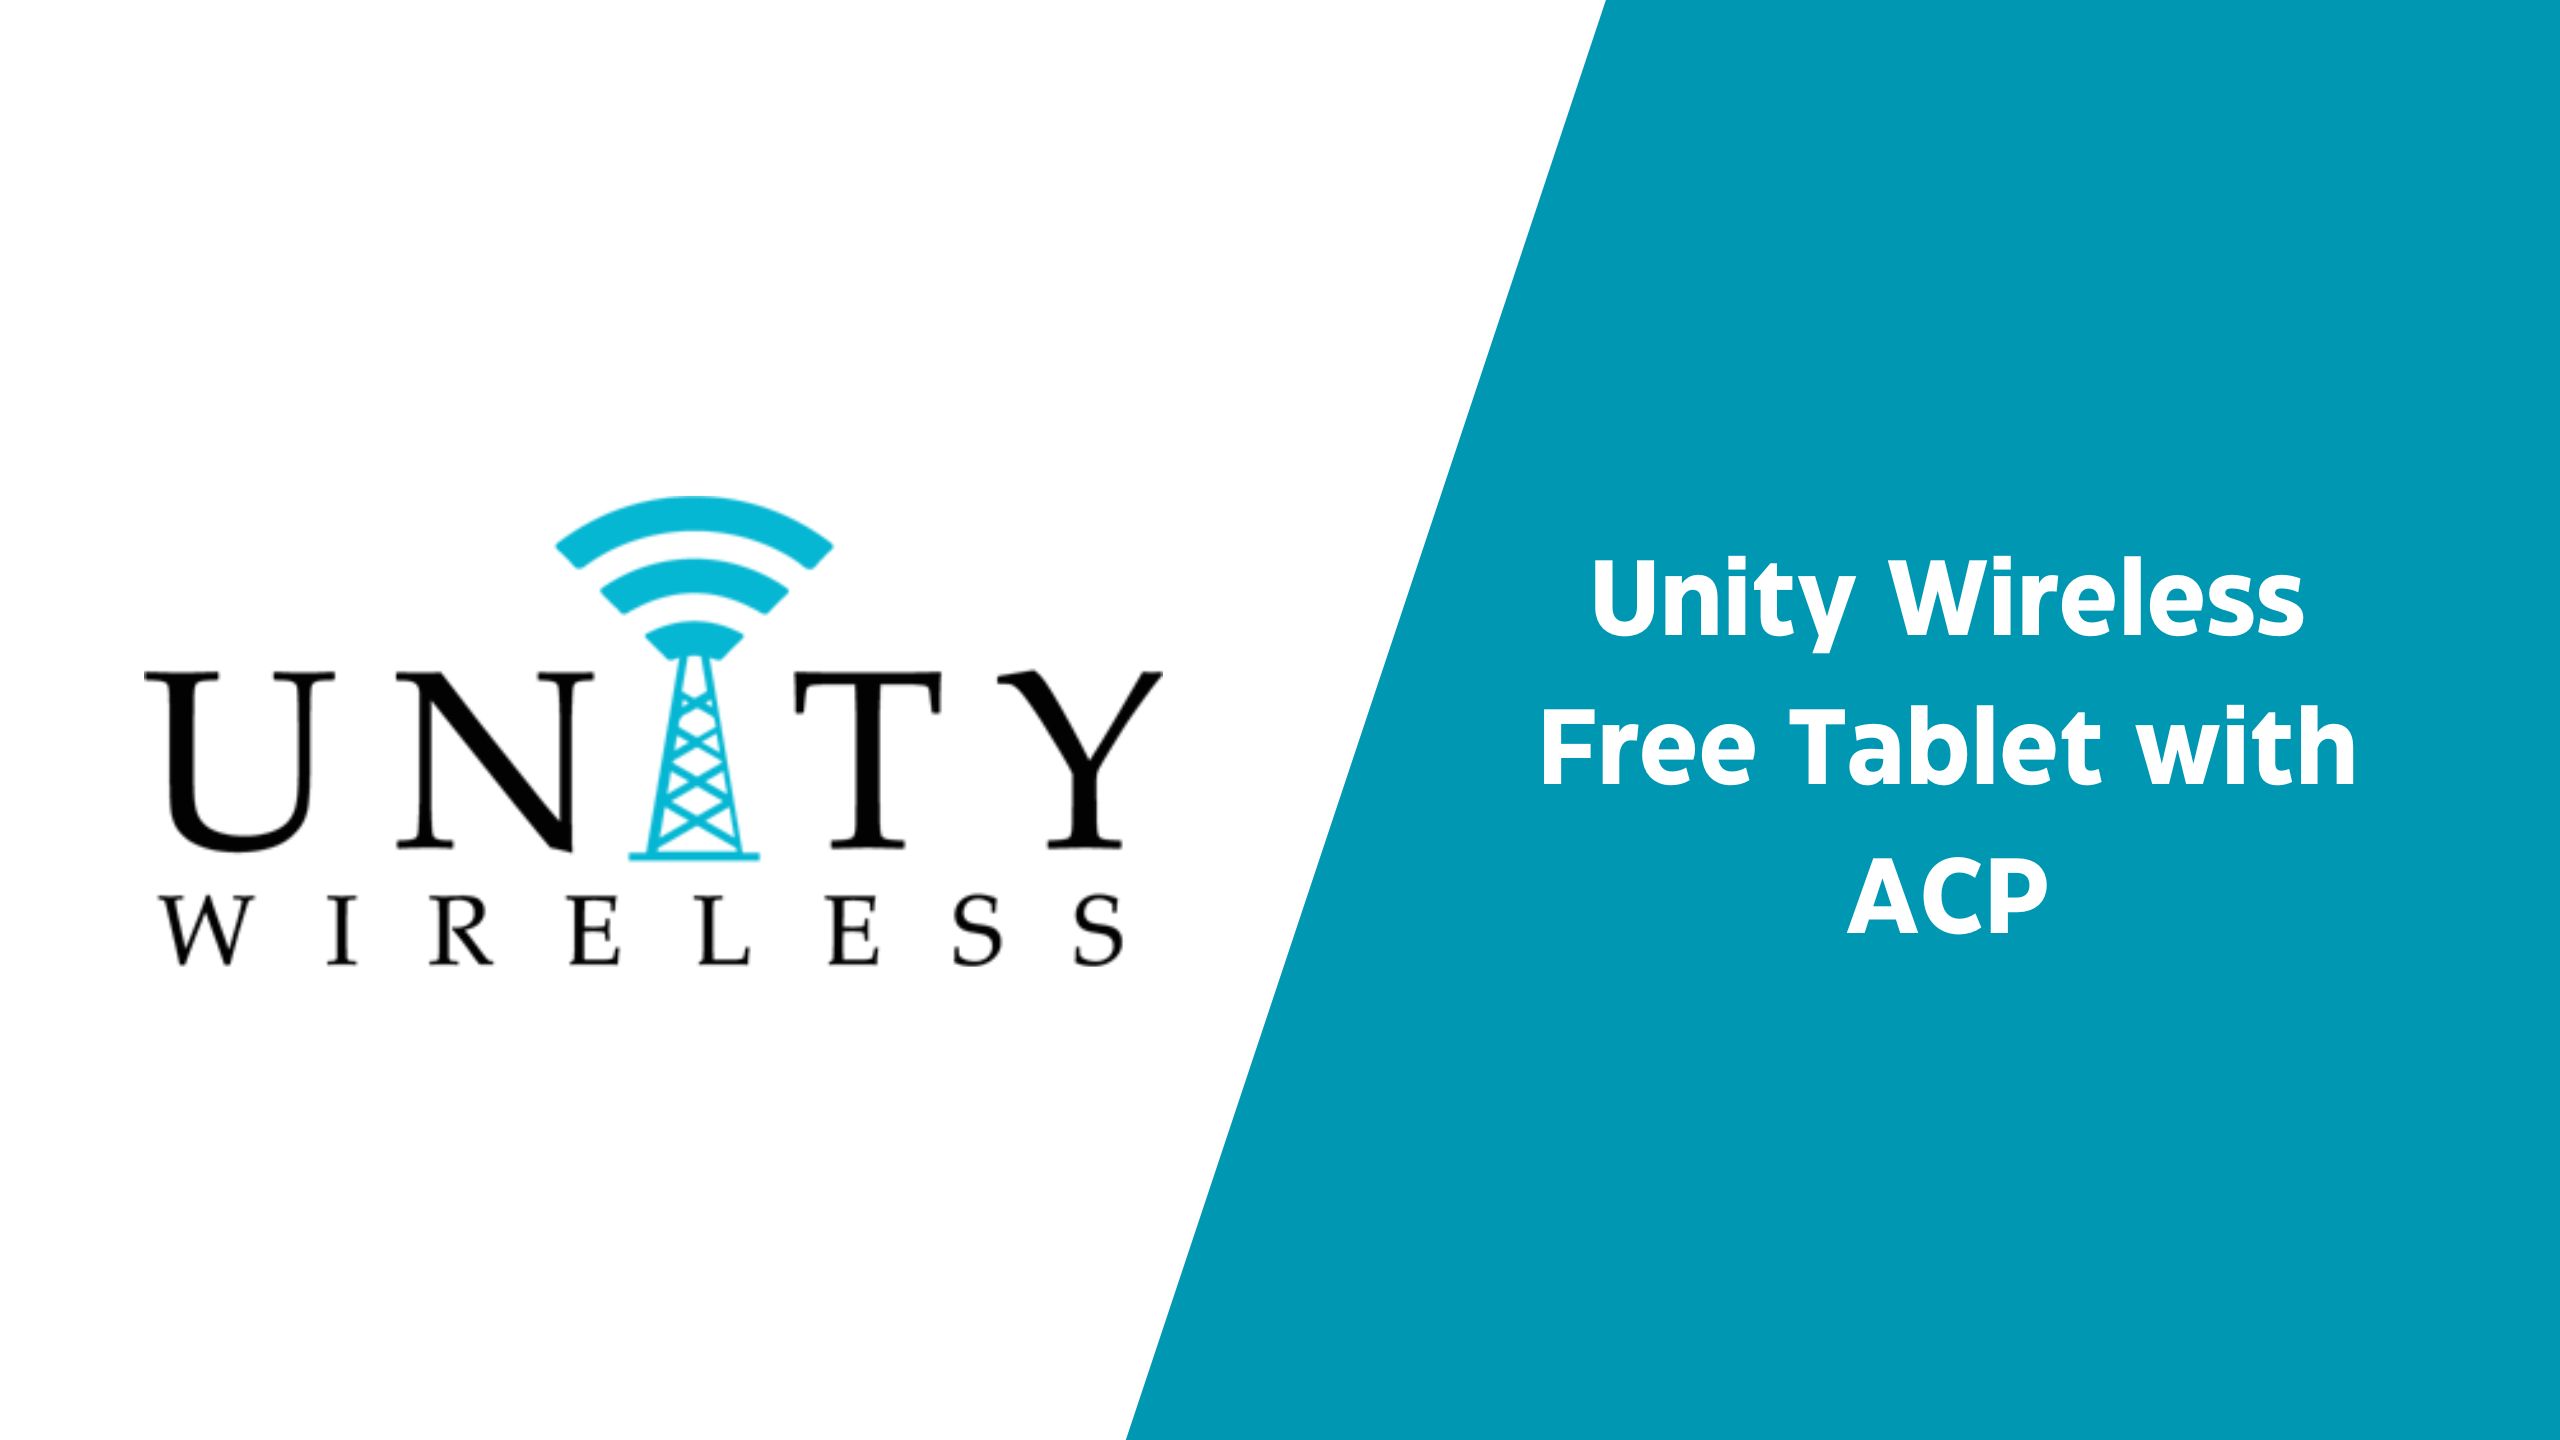 Unity Wireless Free Government Tablet Program : ACP Qualification and Application Guide